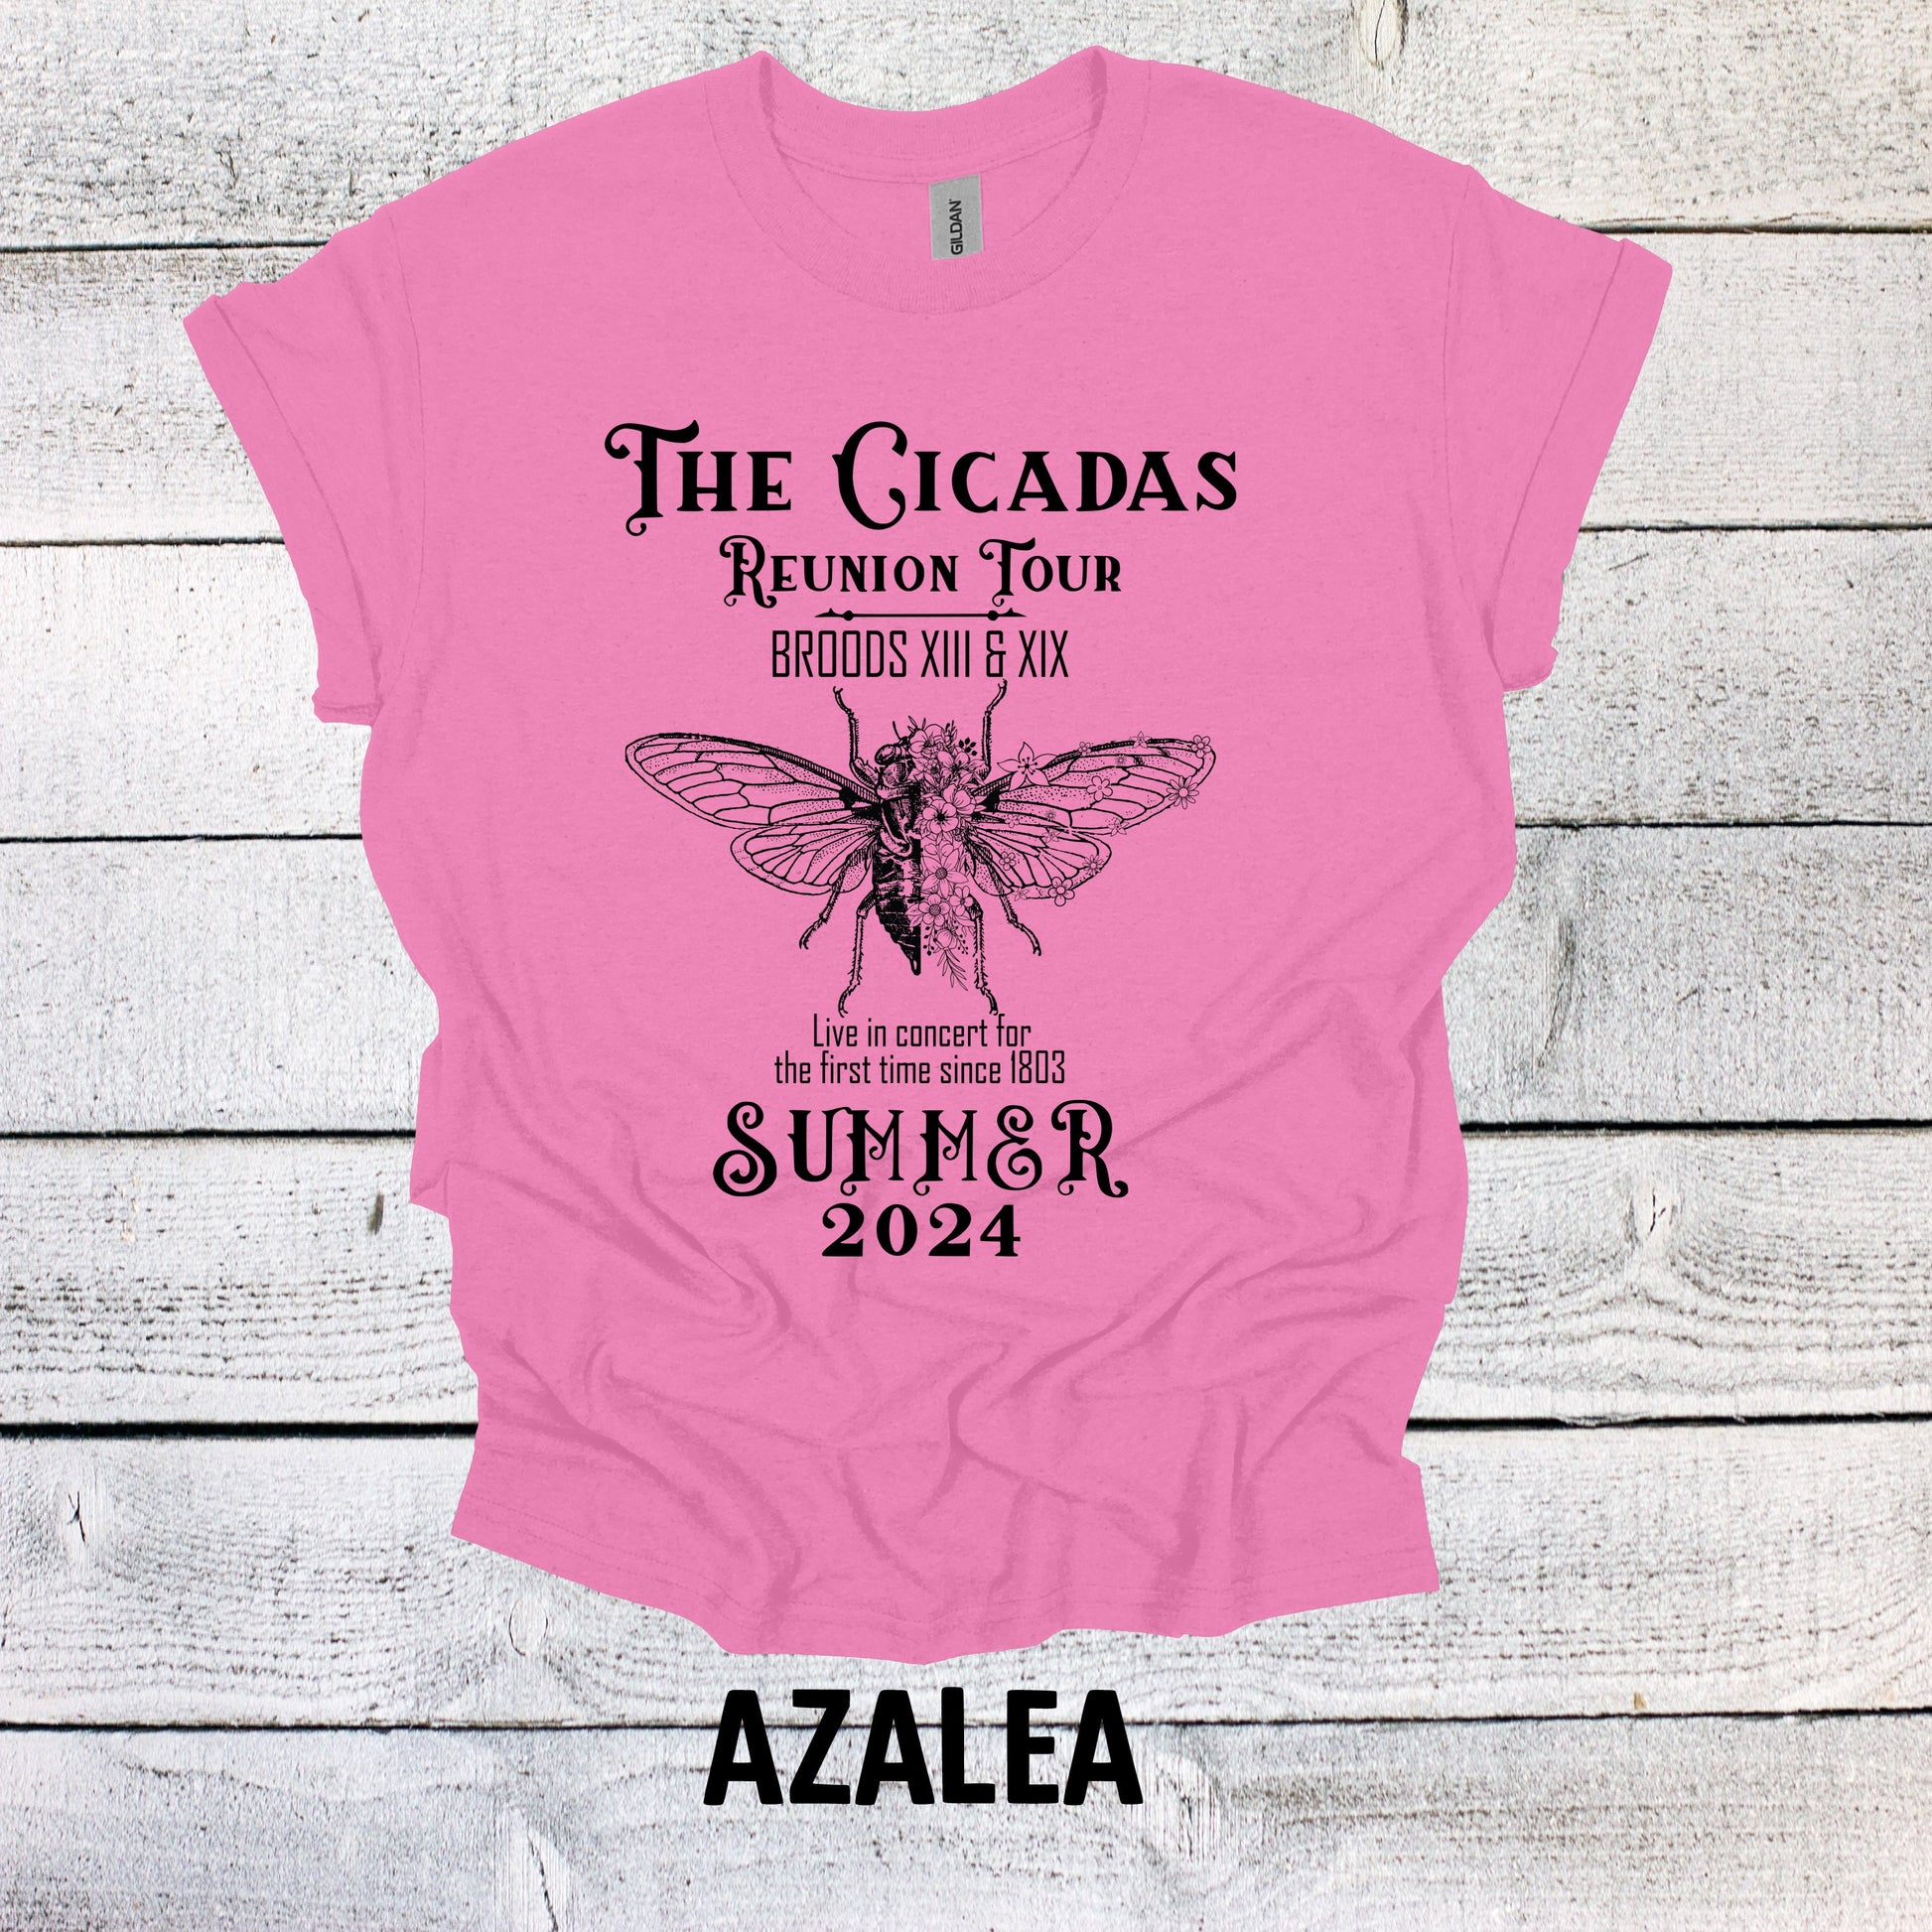 Vintage The Cicadas Summer 2024 Graphic Tee - Retro Nature Lover Shirt - Trendy Bug Print Top for Nature Enthusiasts